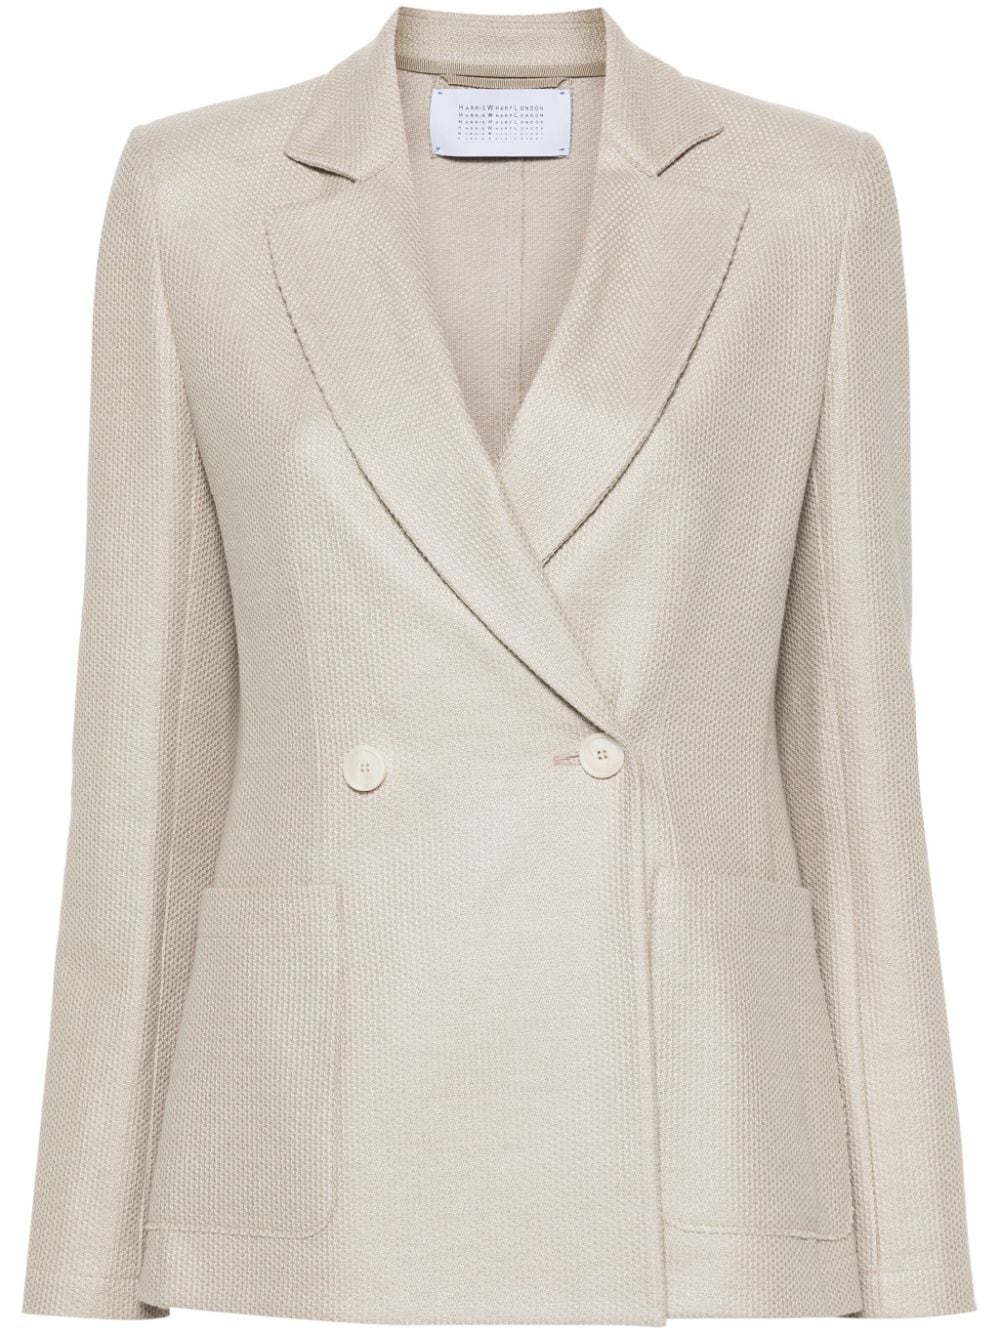 Double Breasted Blazer with Shoulder Pad